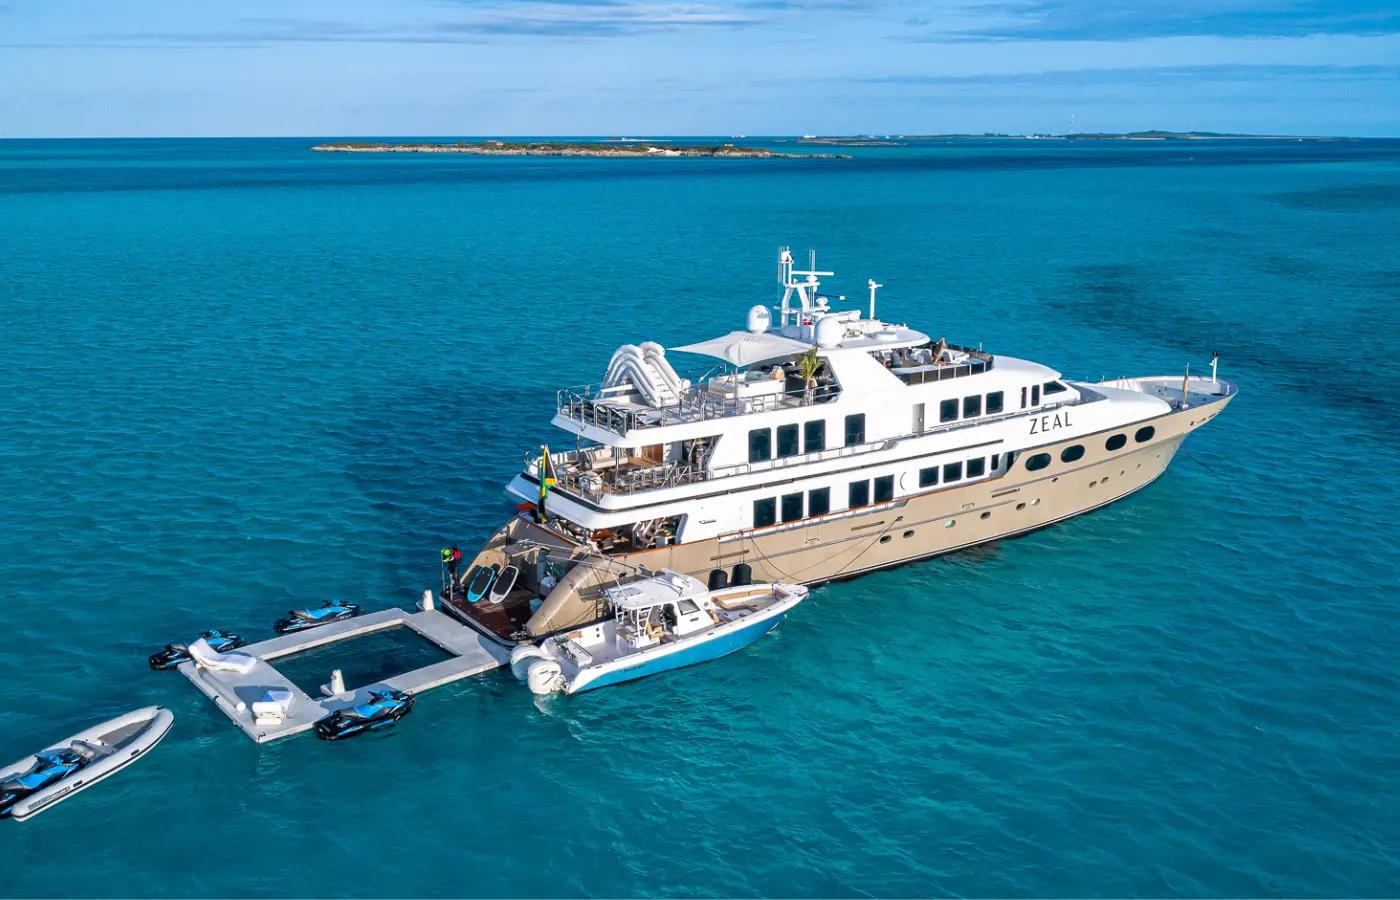 Classic American Yacht Sells for $9.9 Million, Still a Head-Turner [In the News]